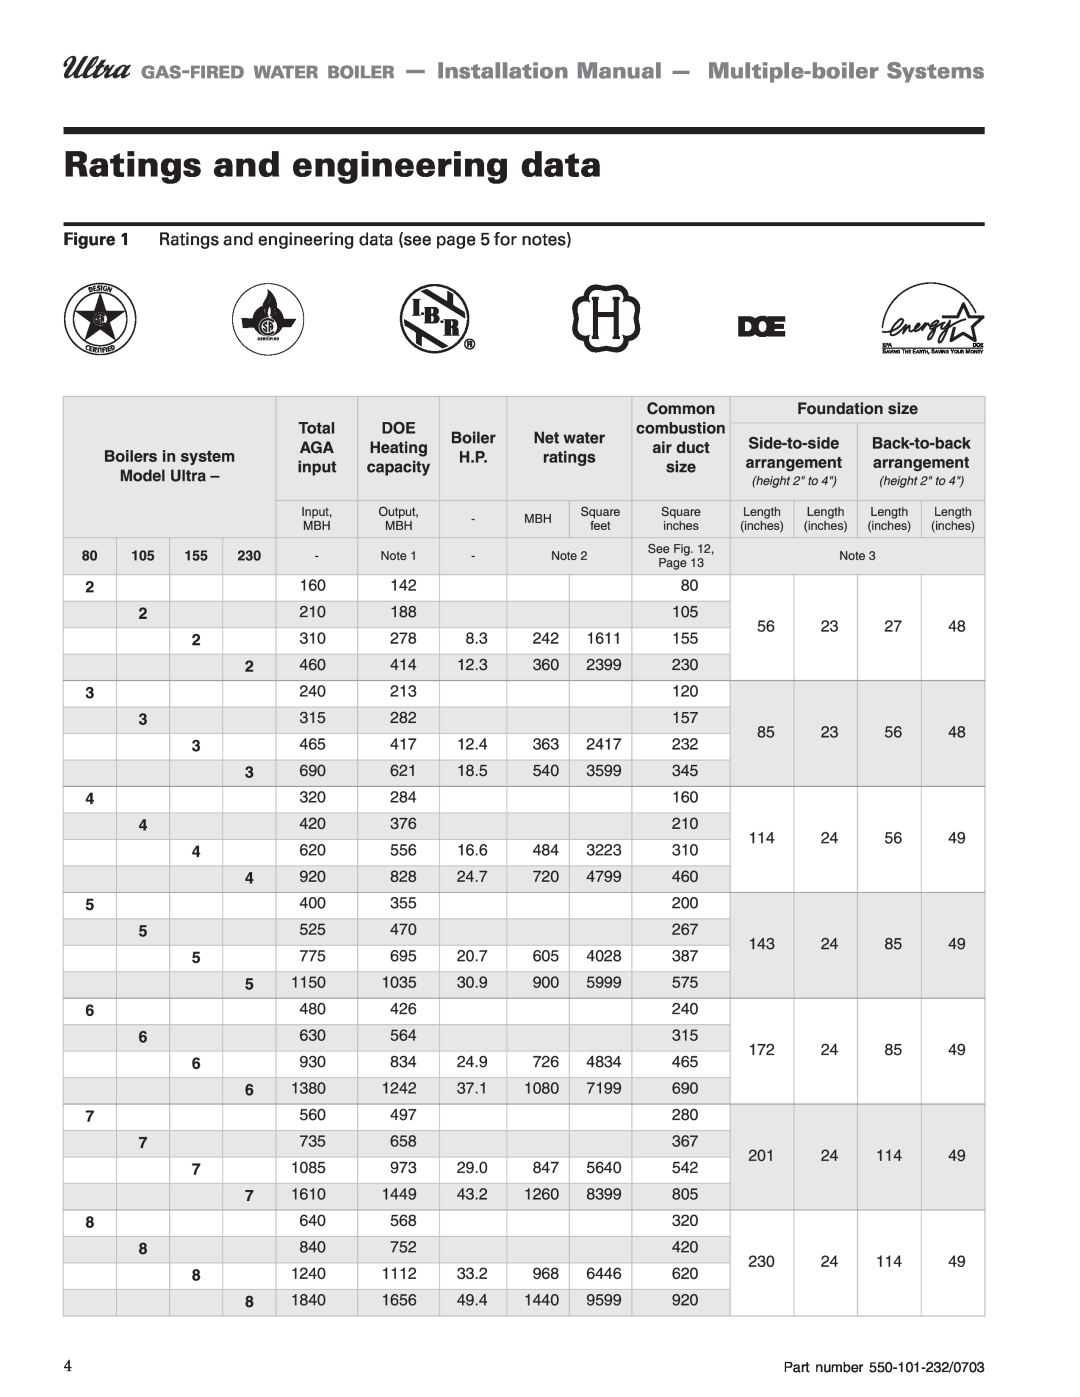 Weil-McLain Boiler installation manual Ratings and engineering data 